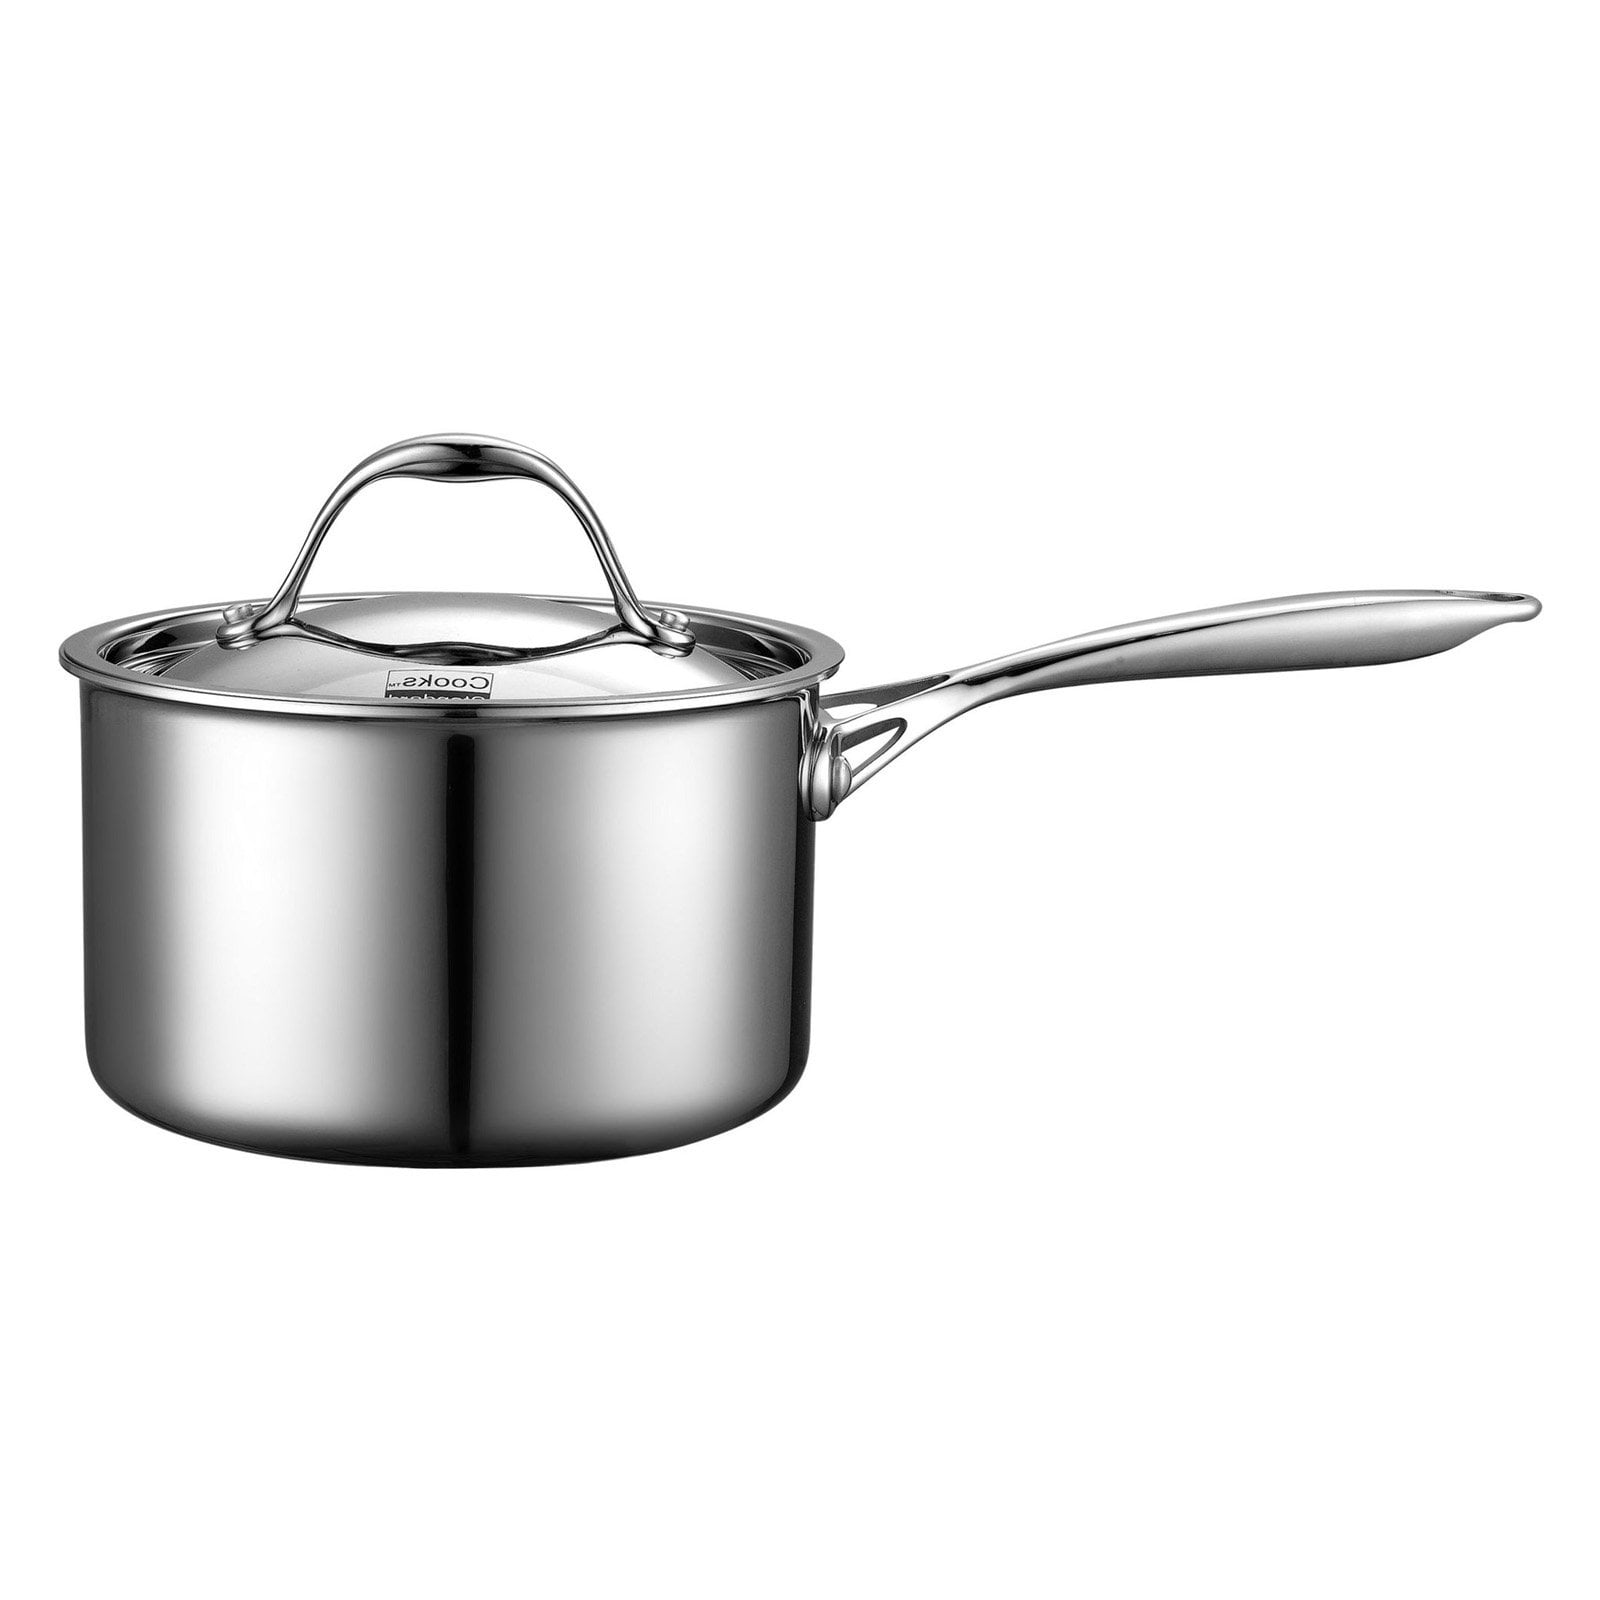 Tri-Ply Stainless Steel 3QT Saucepan Pot with Lid, Professional Cooking,  Multi C